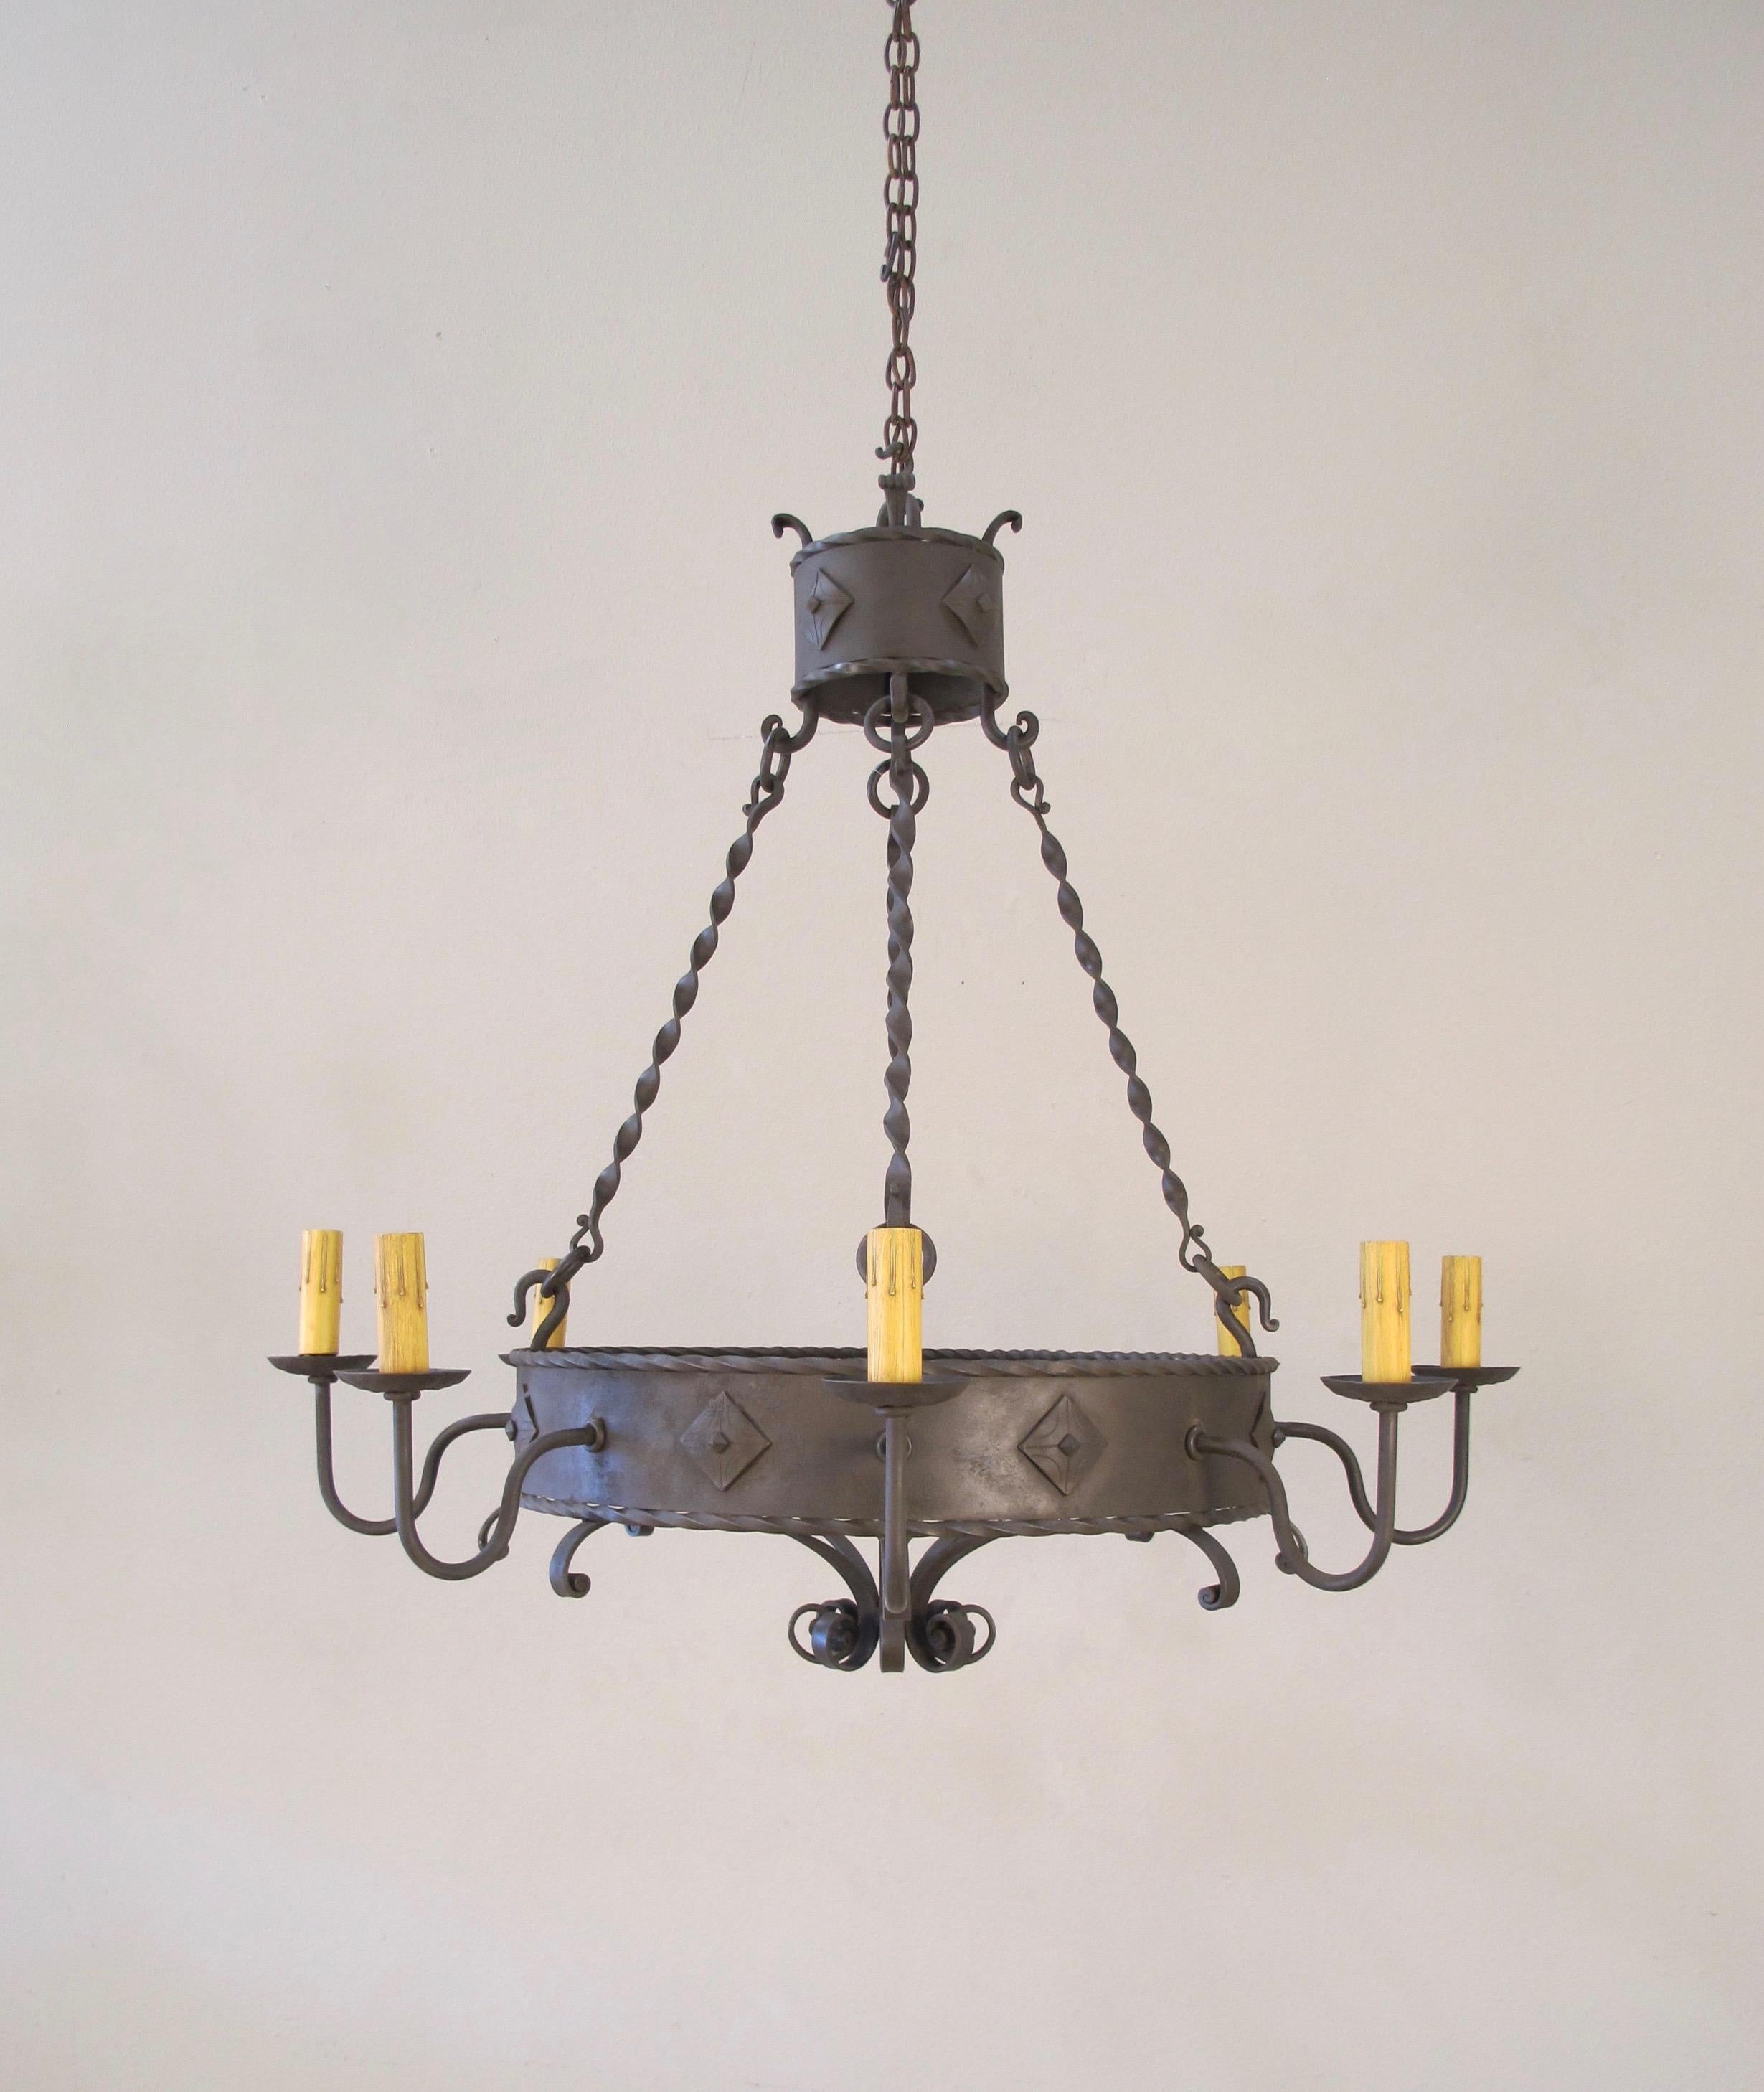 Our 8-light forged iron ring chandelier with Clavos and rope details. Made by chandelier. 8 medium base bulbs up to 60 watts/socket. UL approved, chain and canopy included.